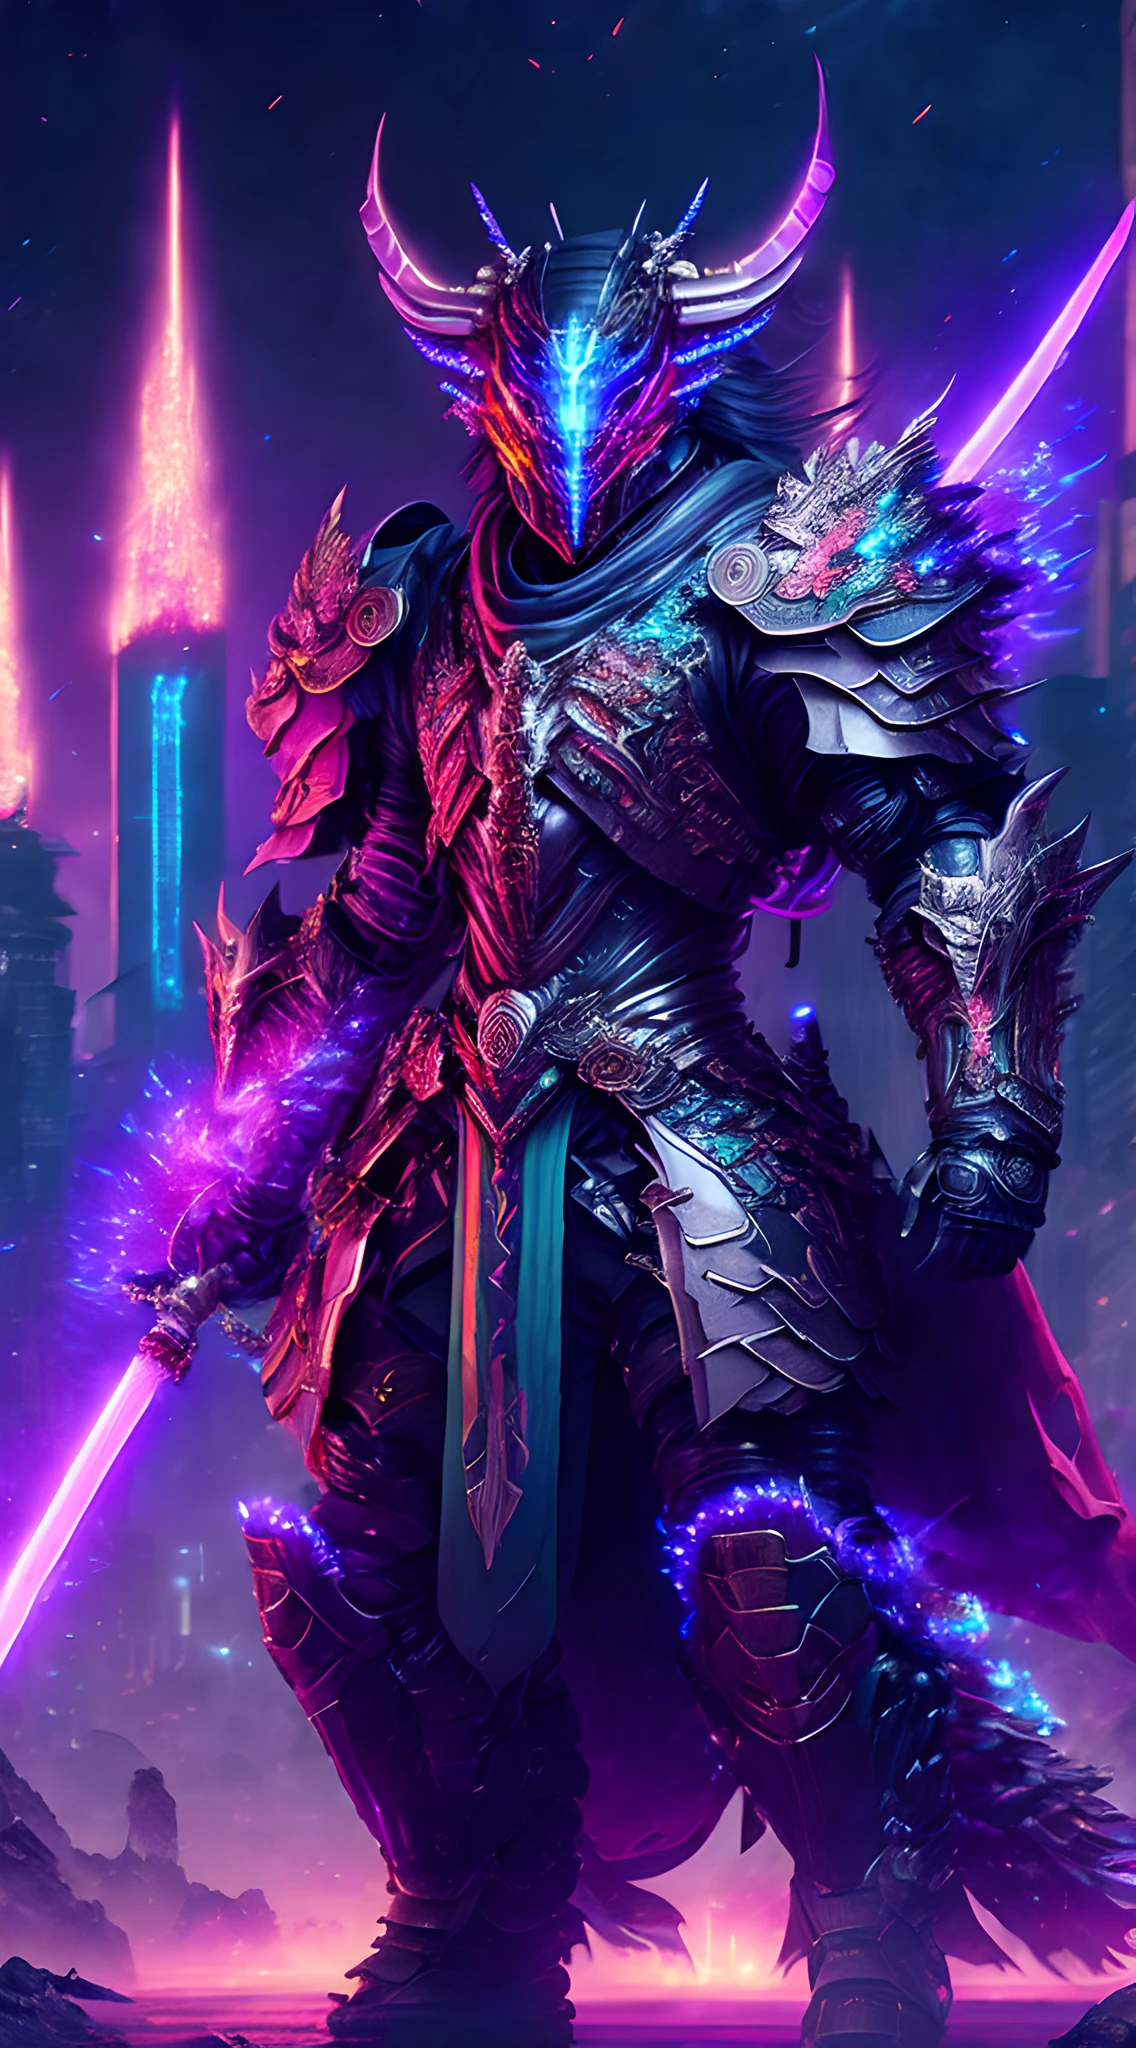 ((Best quality)), ((masterpiece)), (detailed),A futuristic cyborg samurai, adorned with bioluminescent nanotech armor, wielding a katana infused with ancient runes, engaged in a gravity-defying duel against a colossal mechanical dragon amidst a neon-lit megacity, with holographic skyscrapers and cascading streams of binary code